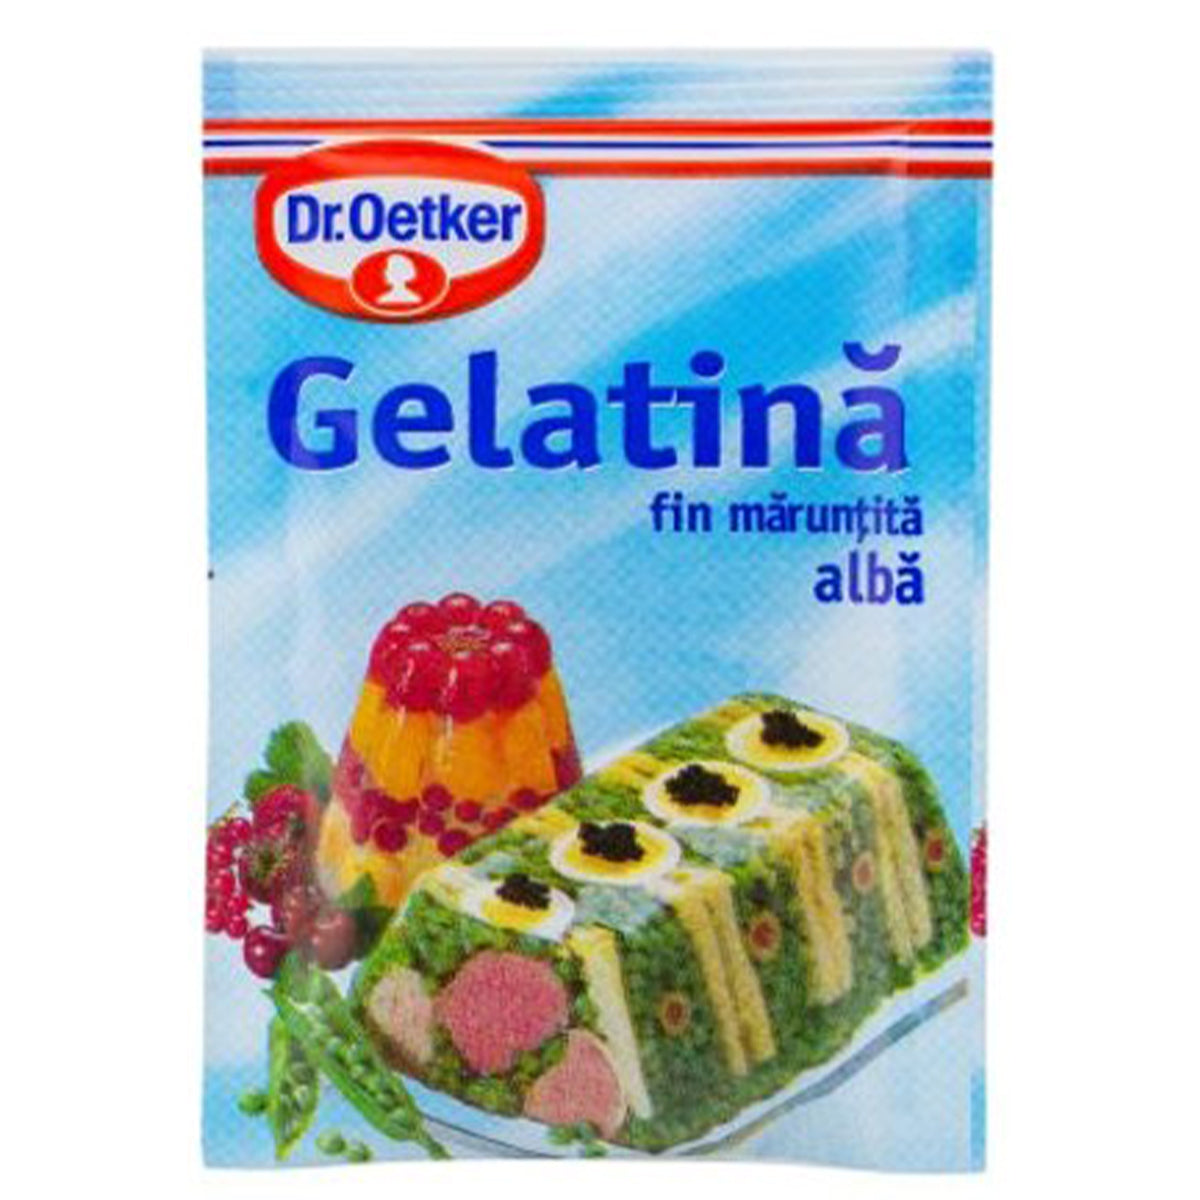 A packet of Dr. Oetker - White Gelatine - 10g in a plastic bag.